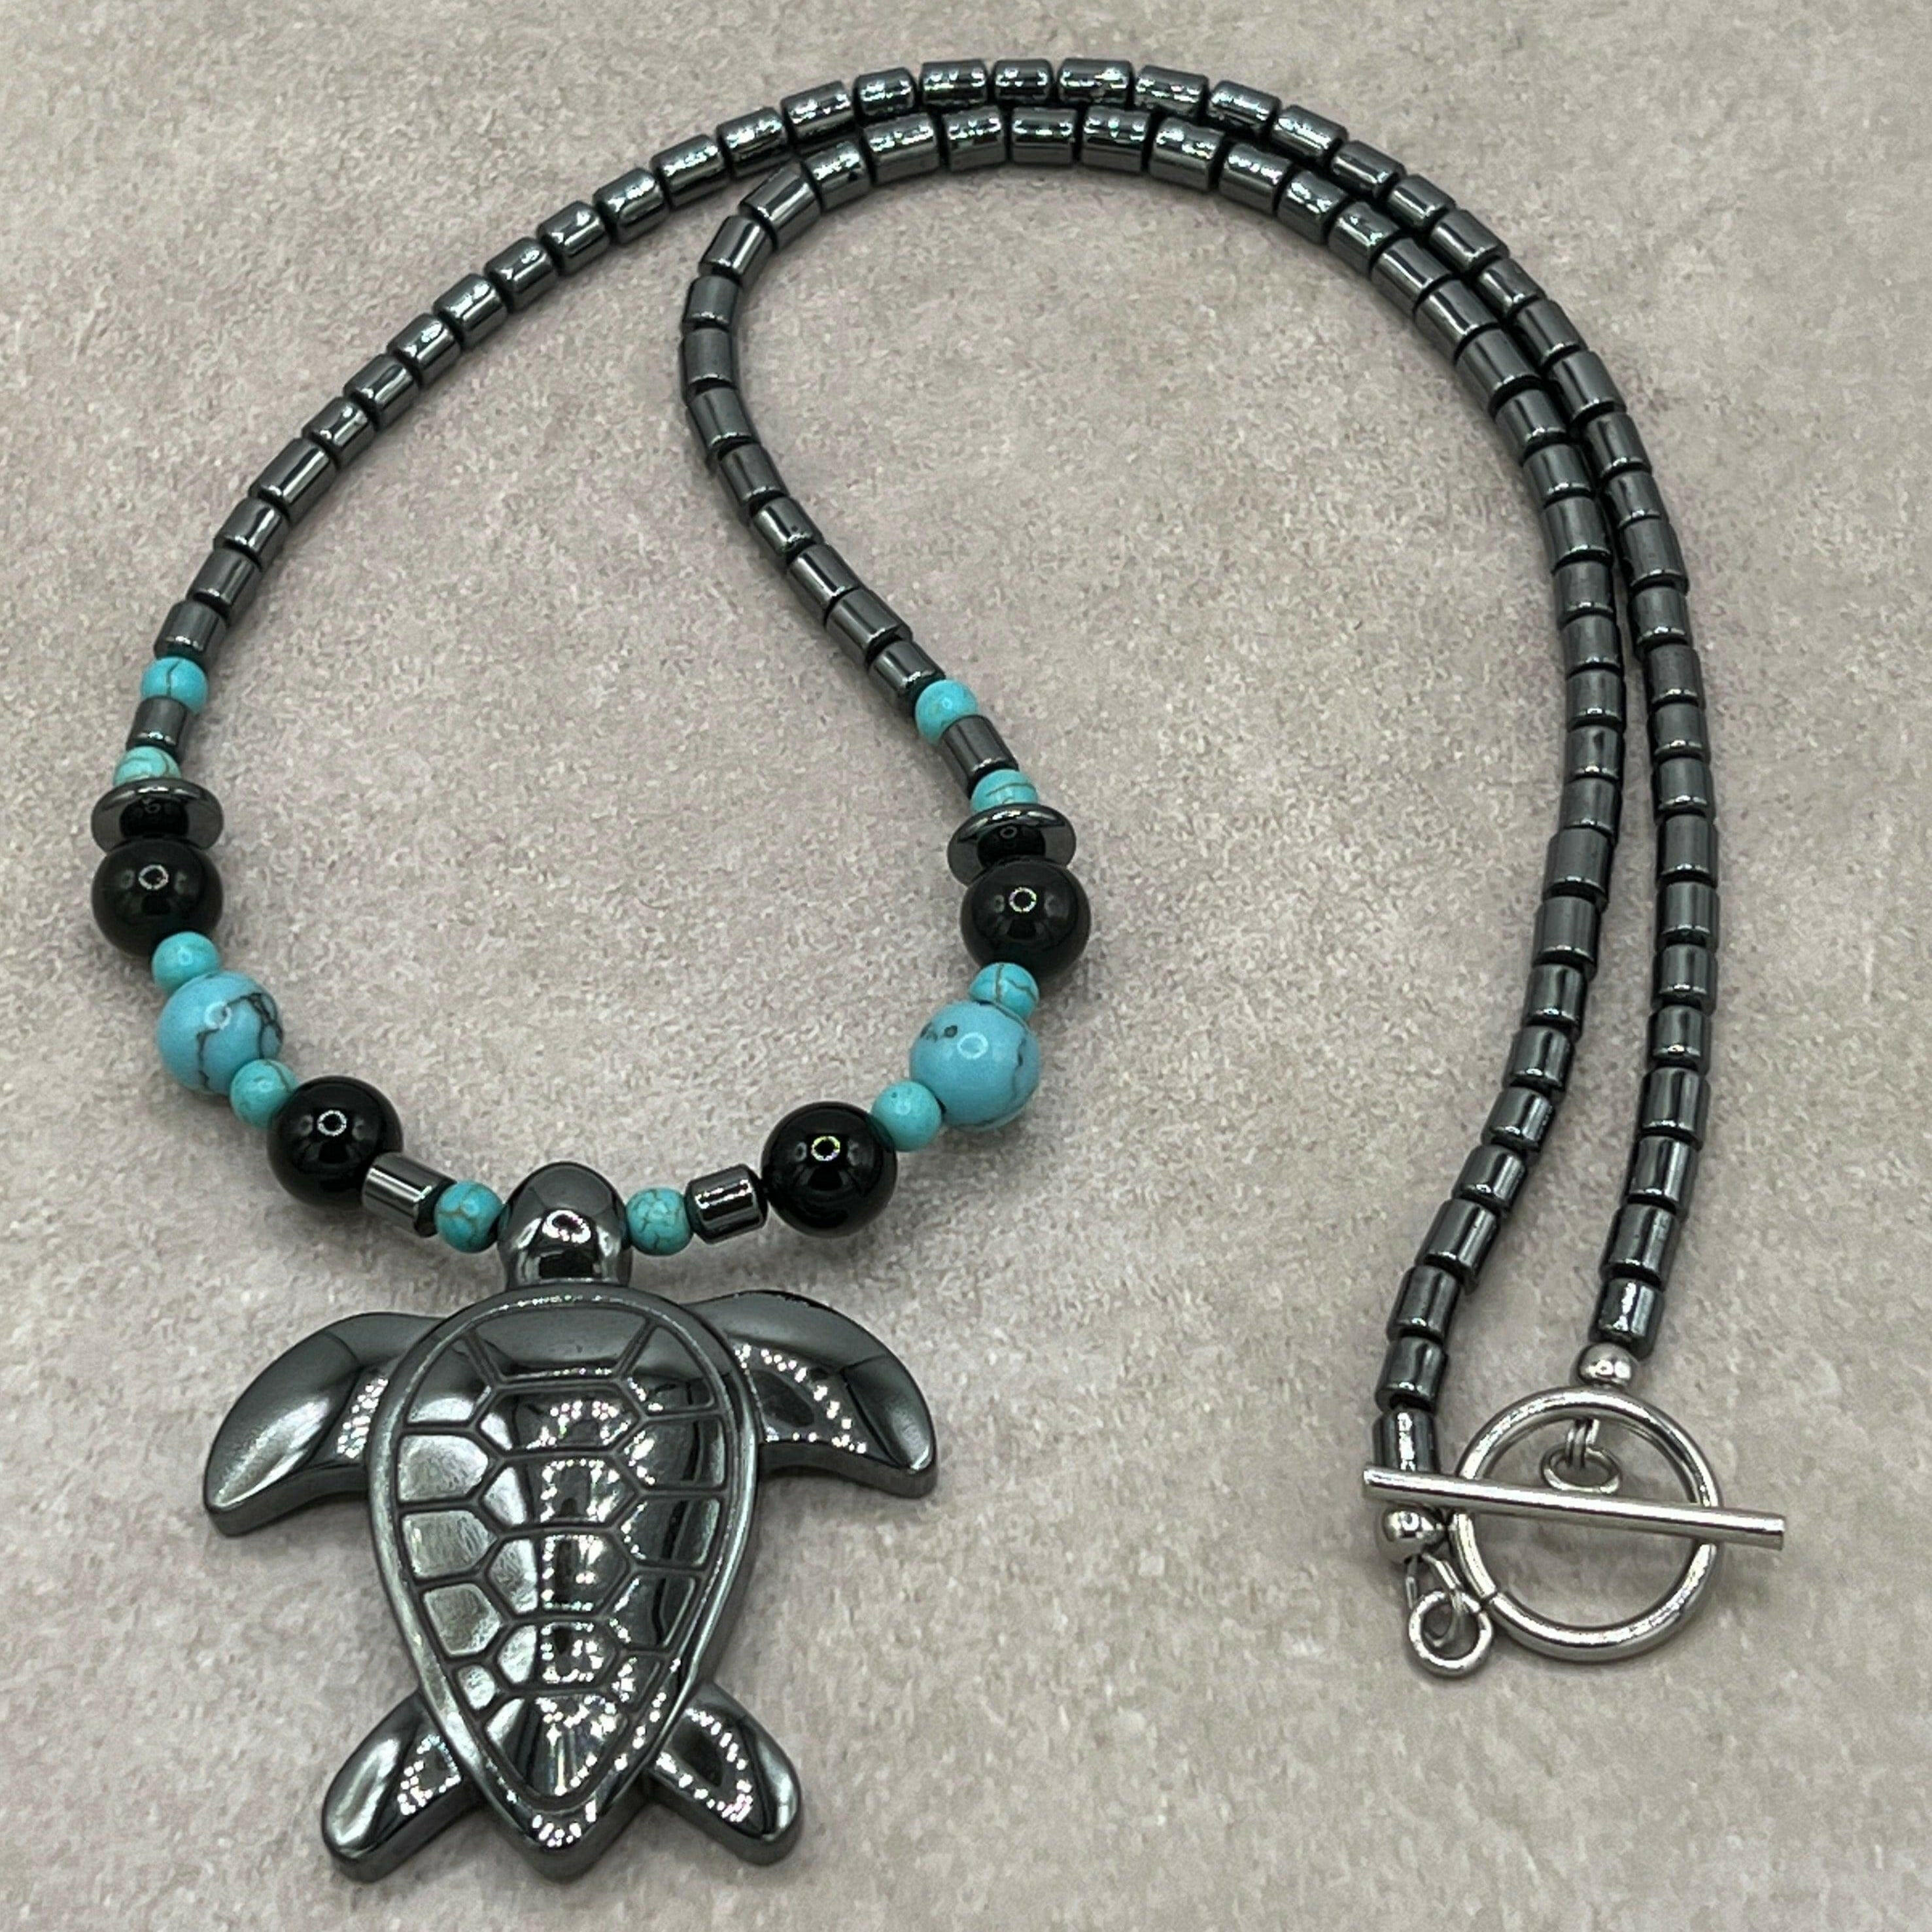 Bec Sue Jewelry Shop Necklaces 19 / black/blue / hematite/turquoise Unique Turtle Turquoise and Hematite Necklace with Sterling Silver Clasp Tags 39